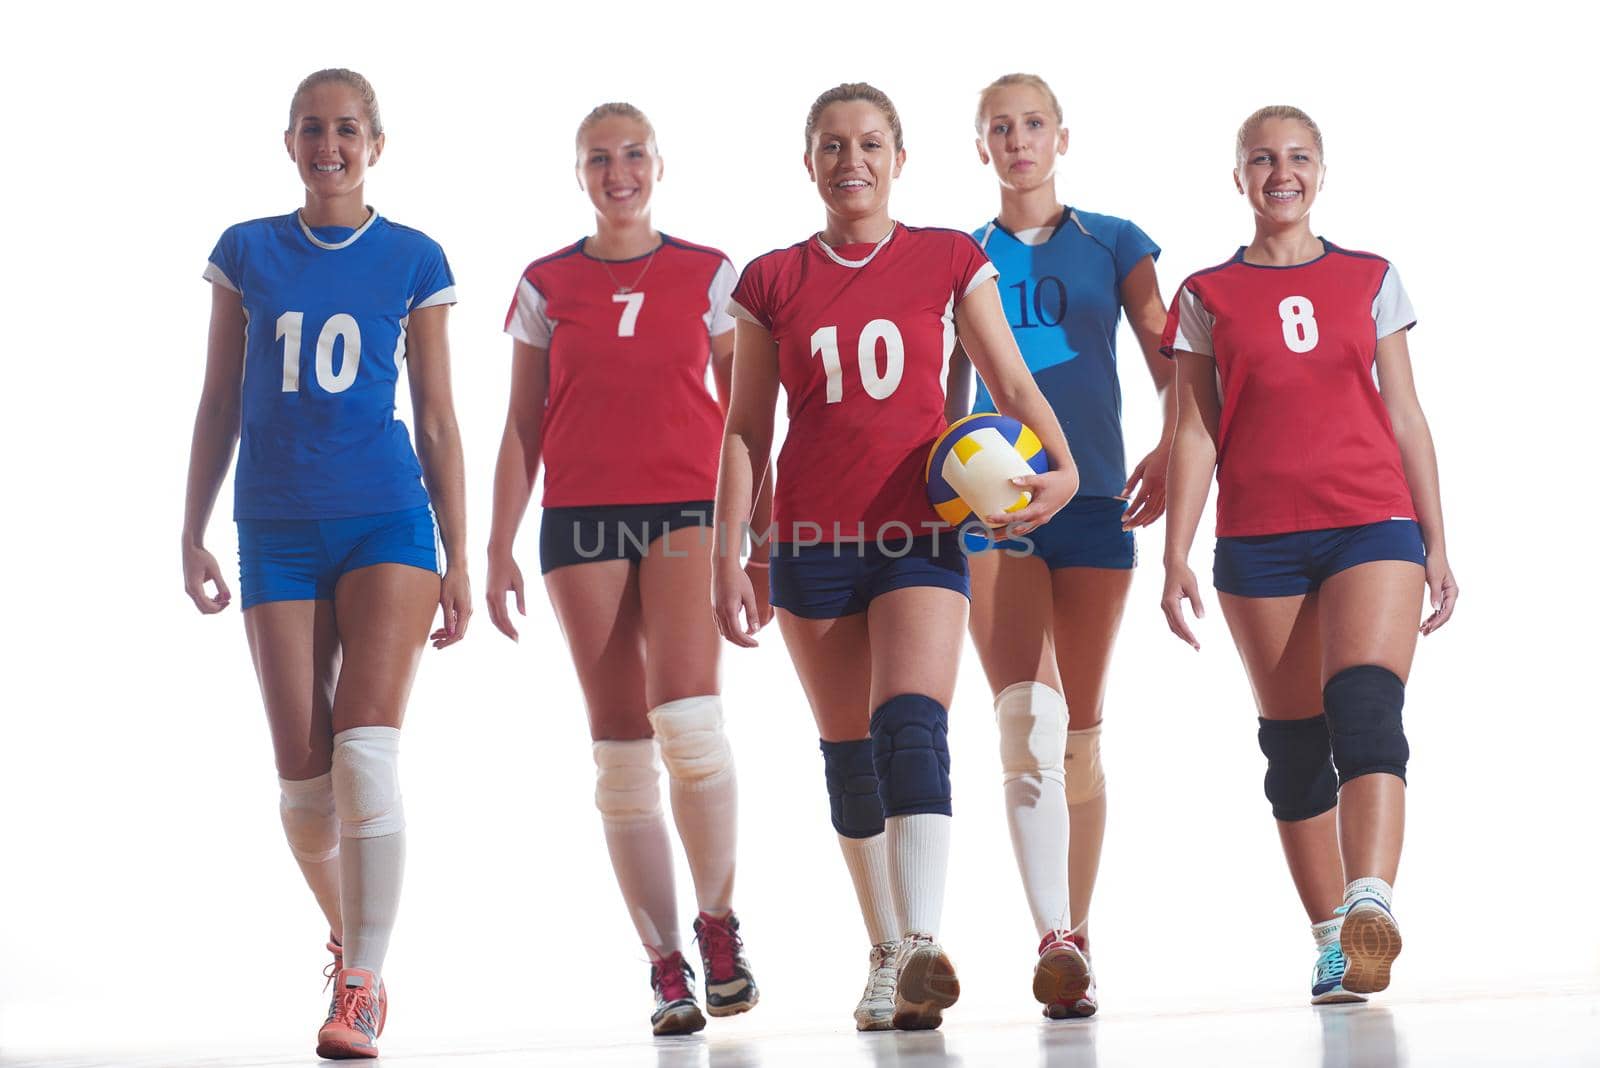 volleyball game sport with group of young beautiful  girls indoor in sport arena ball net